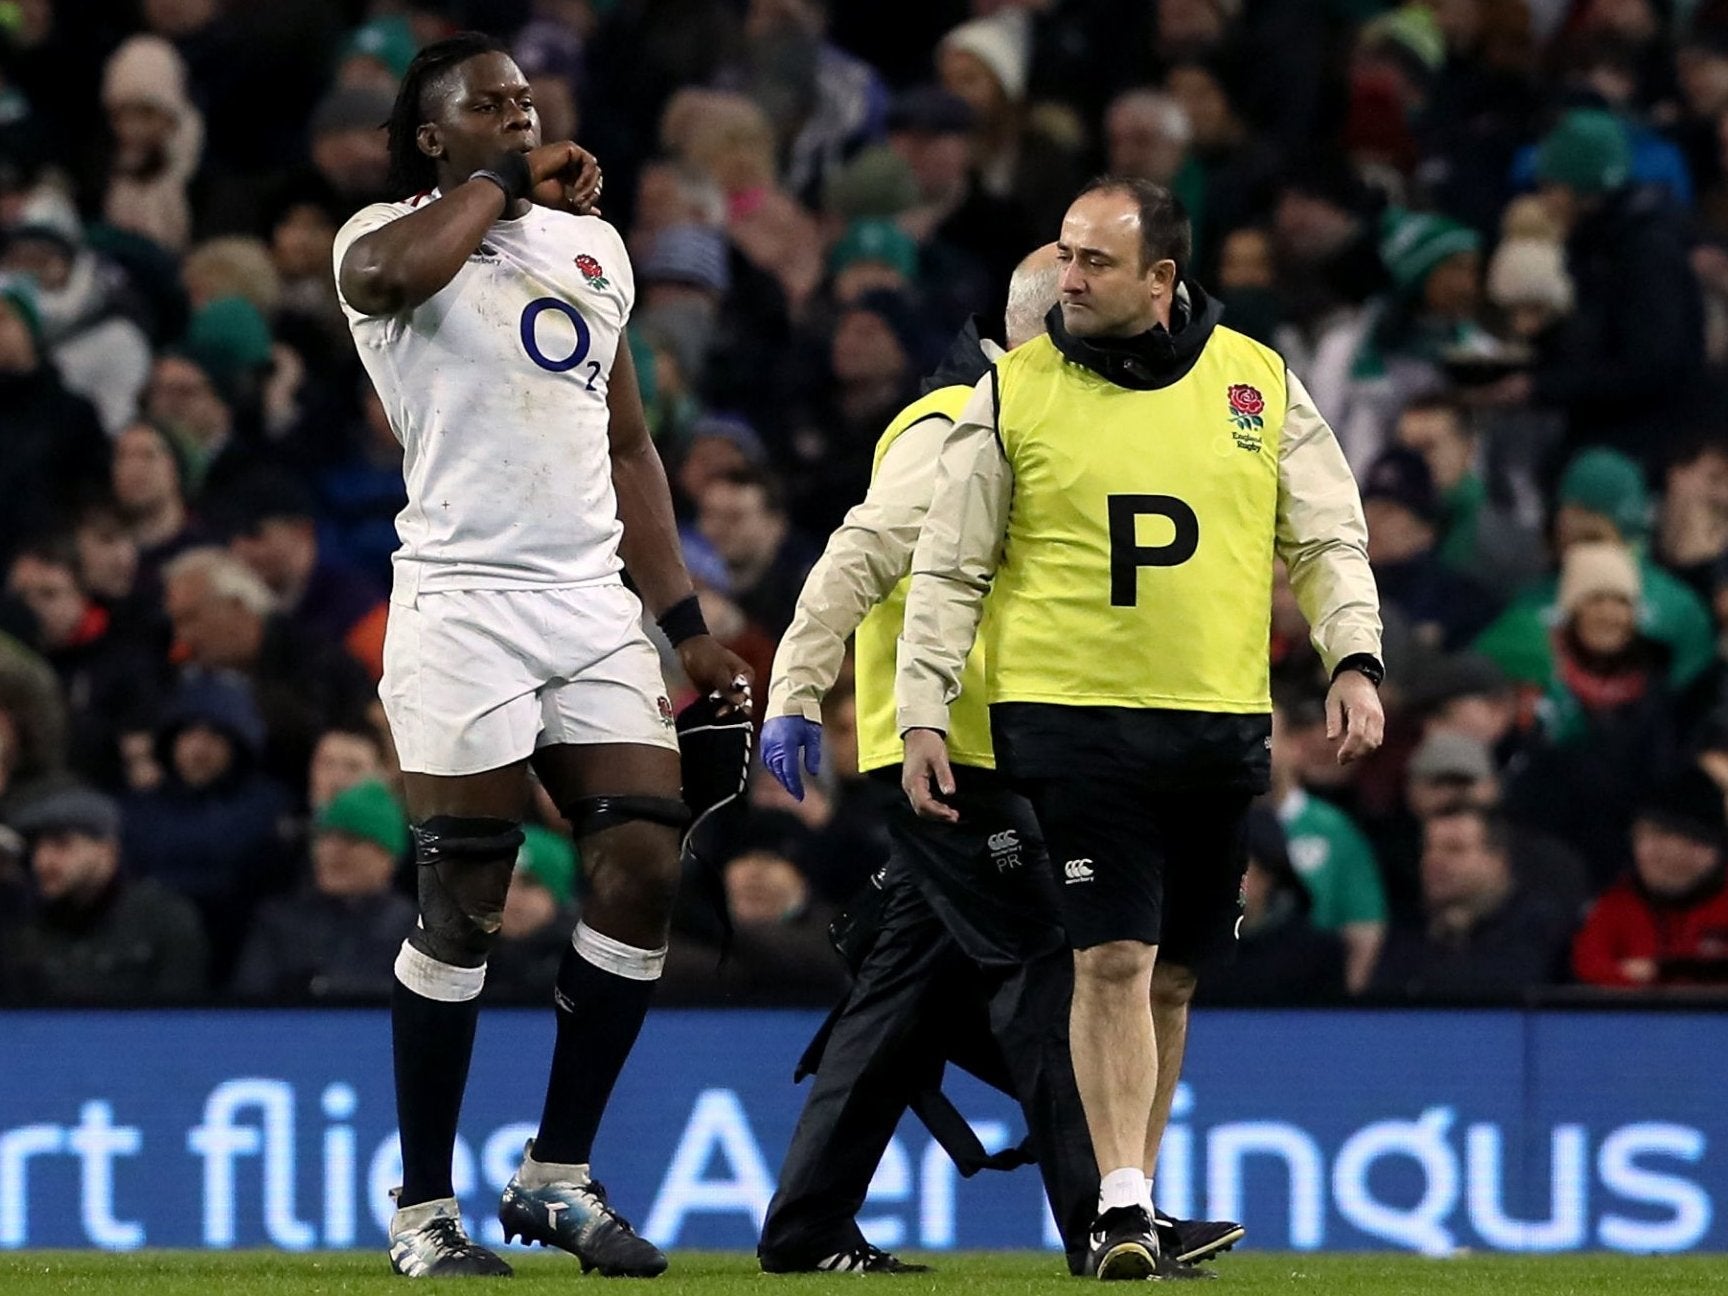 Maro Itoje's injury sustained against Ireland has cost him his competition